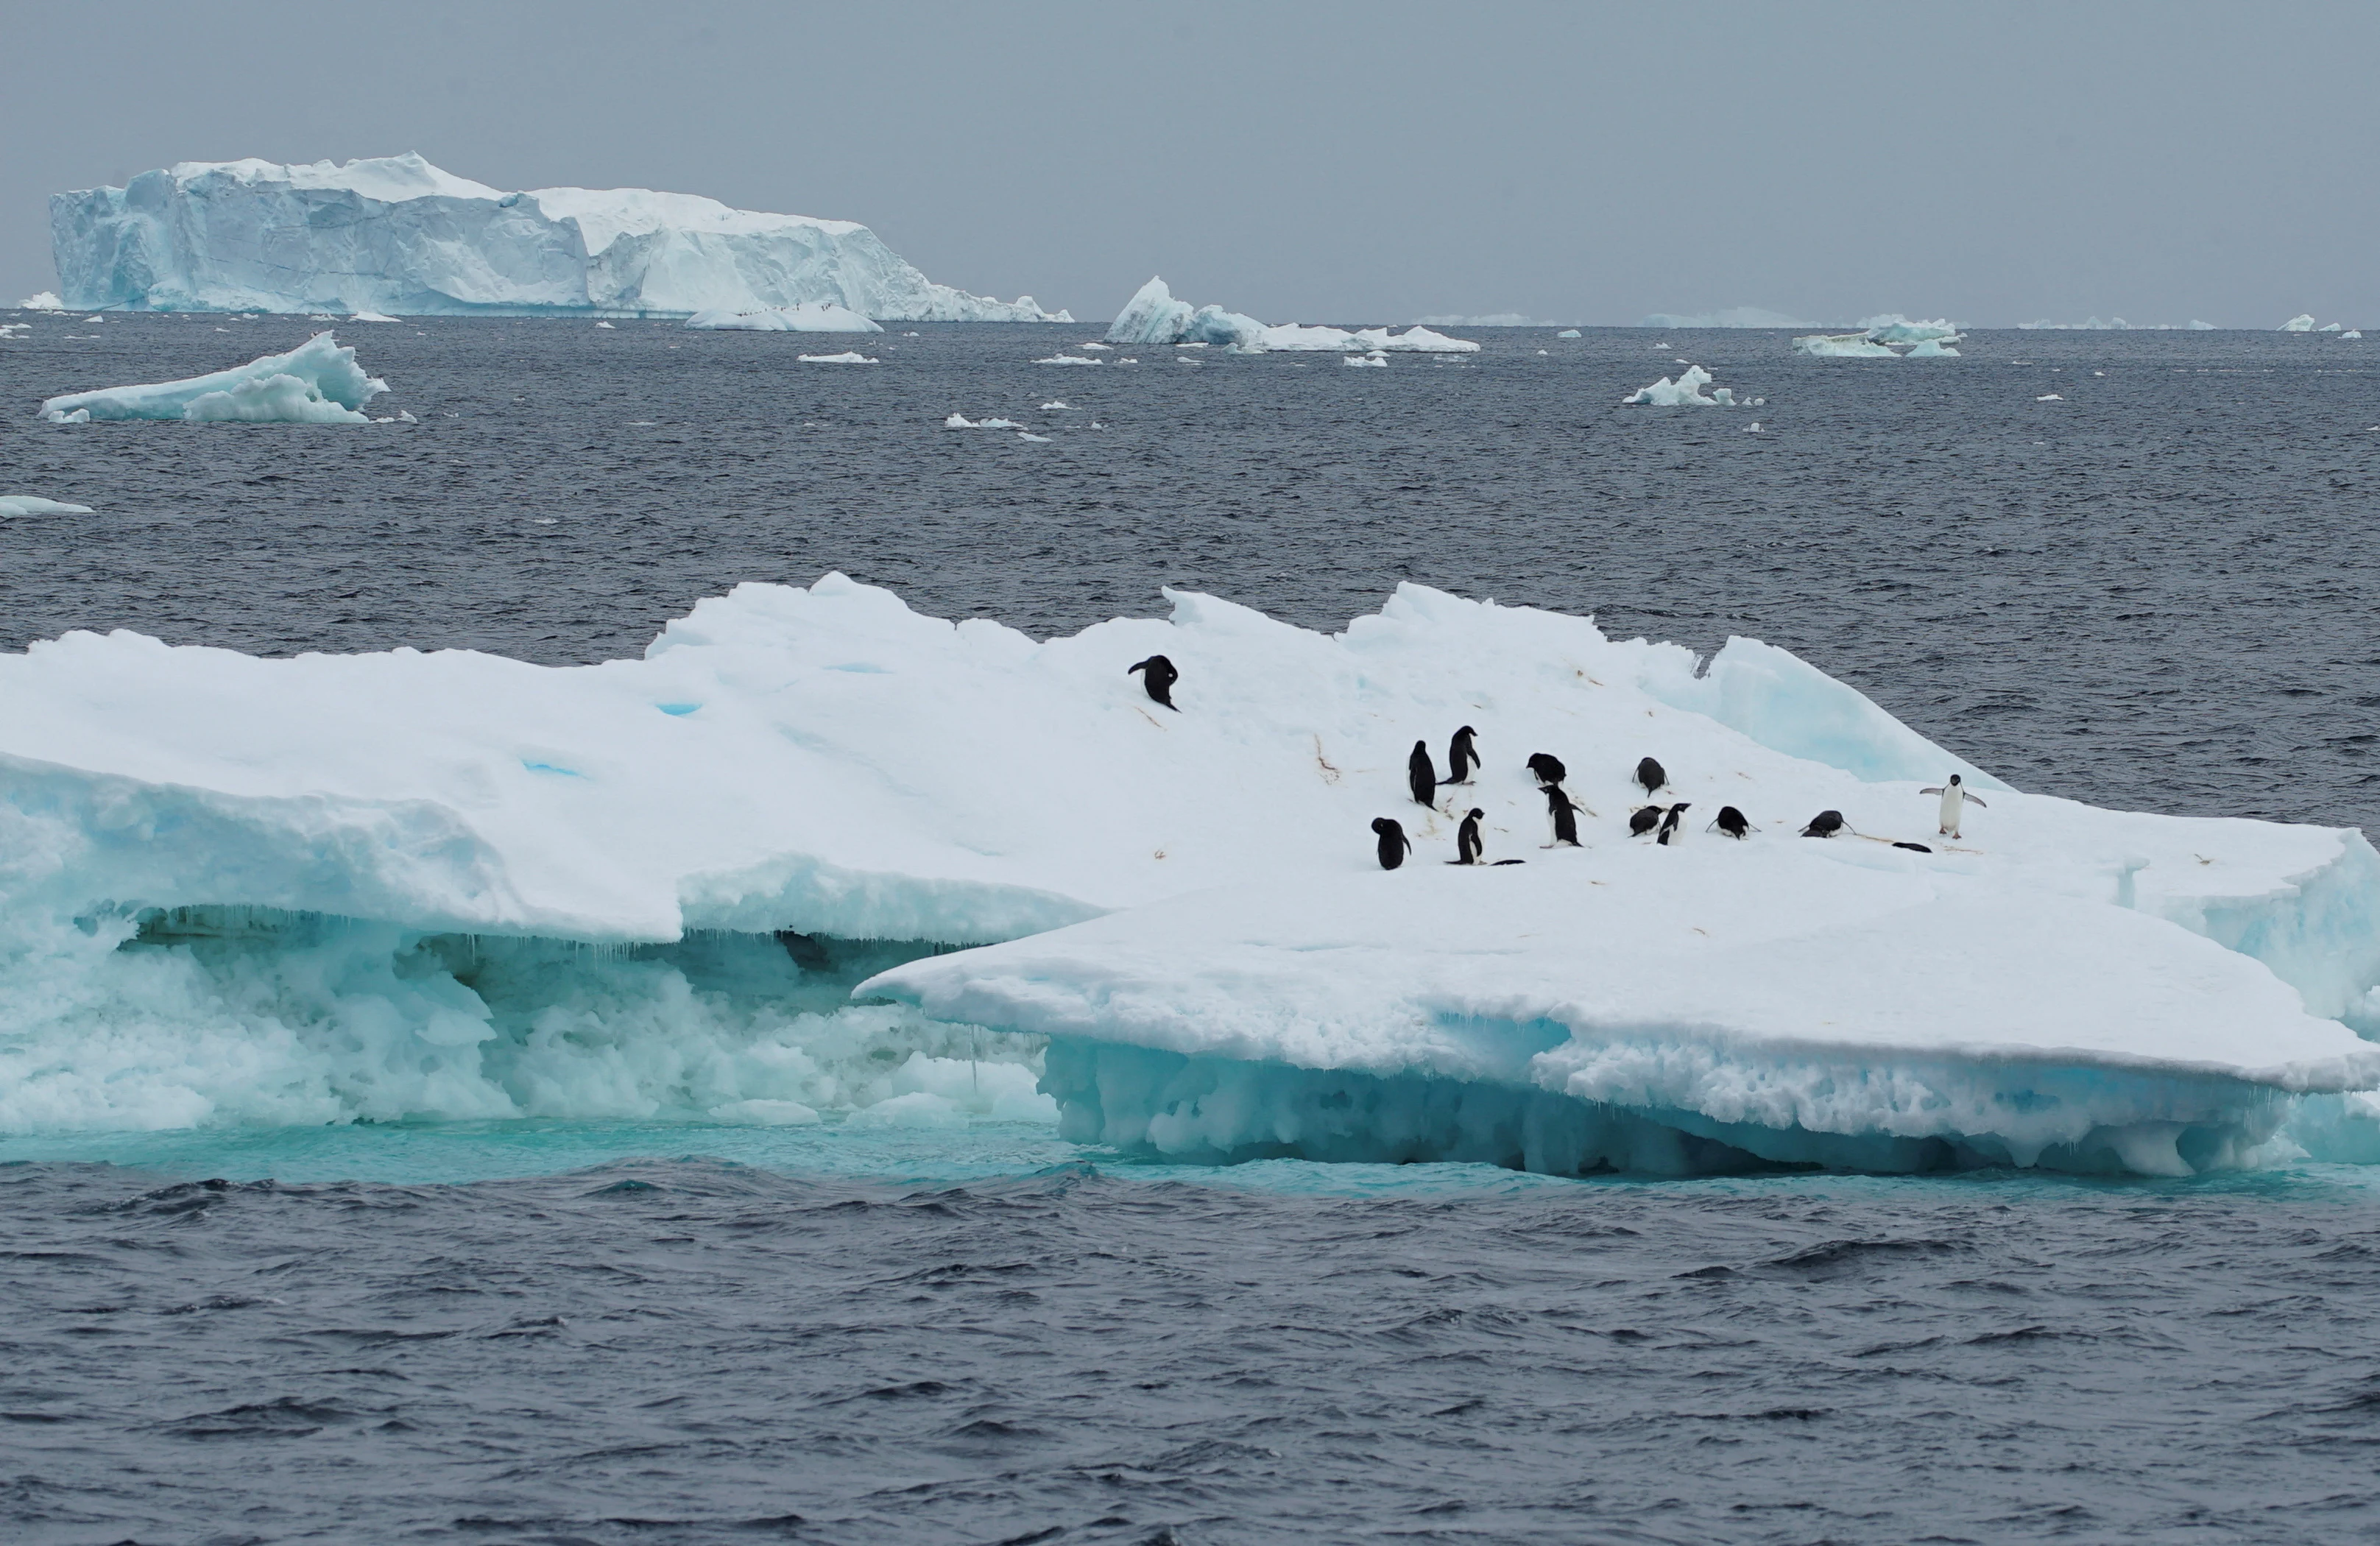 Reuters - 2023-03-29T155854Z 3 LYNXMPEJ2S0OR RTROPTP 4 CLIMATE-CHANGE-ANTARCTIC-WATERS